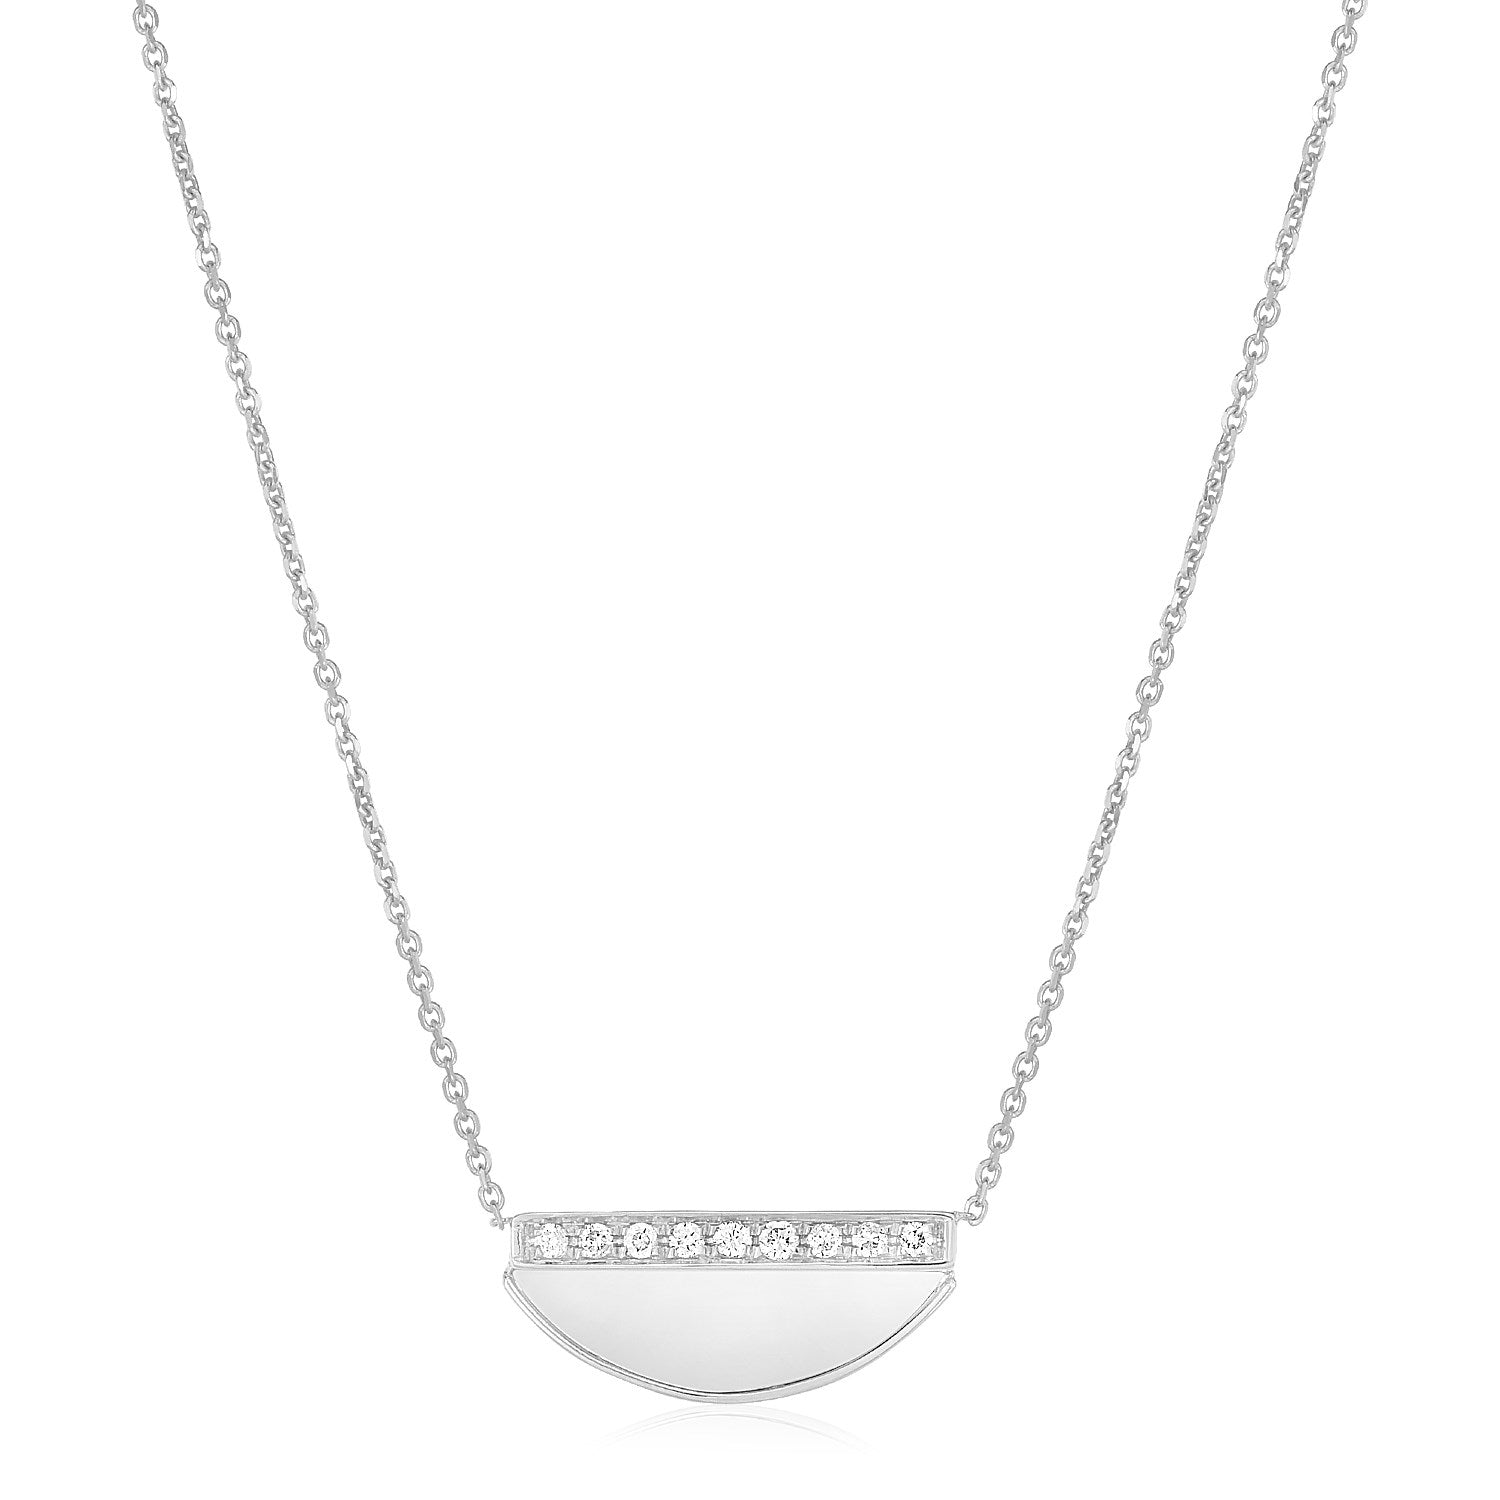 14K White Gold Half Moon Necklace with Diamonds